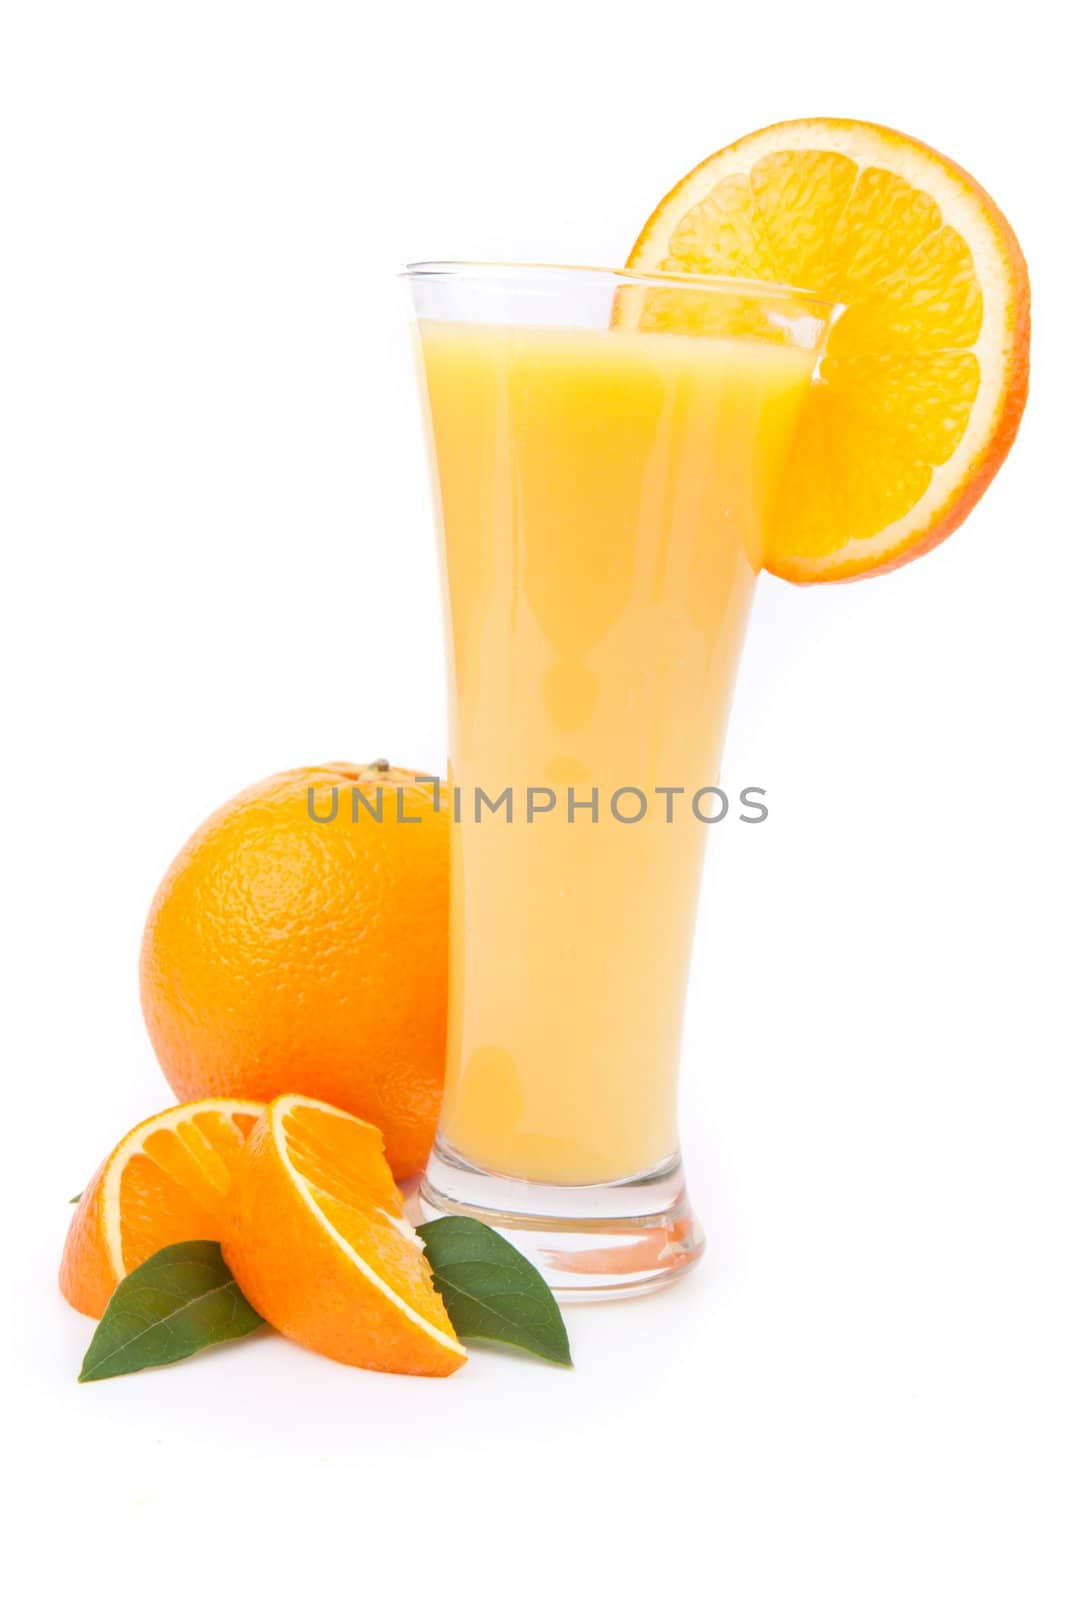 Orange riped against a white background